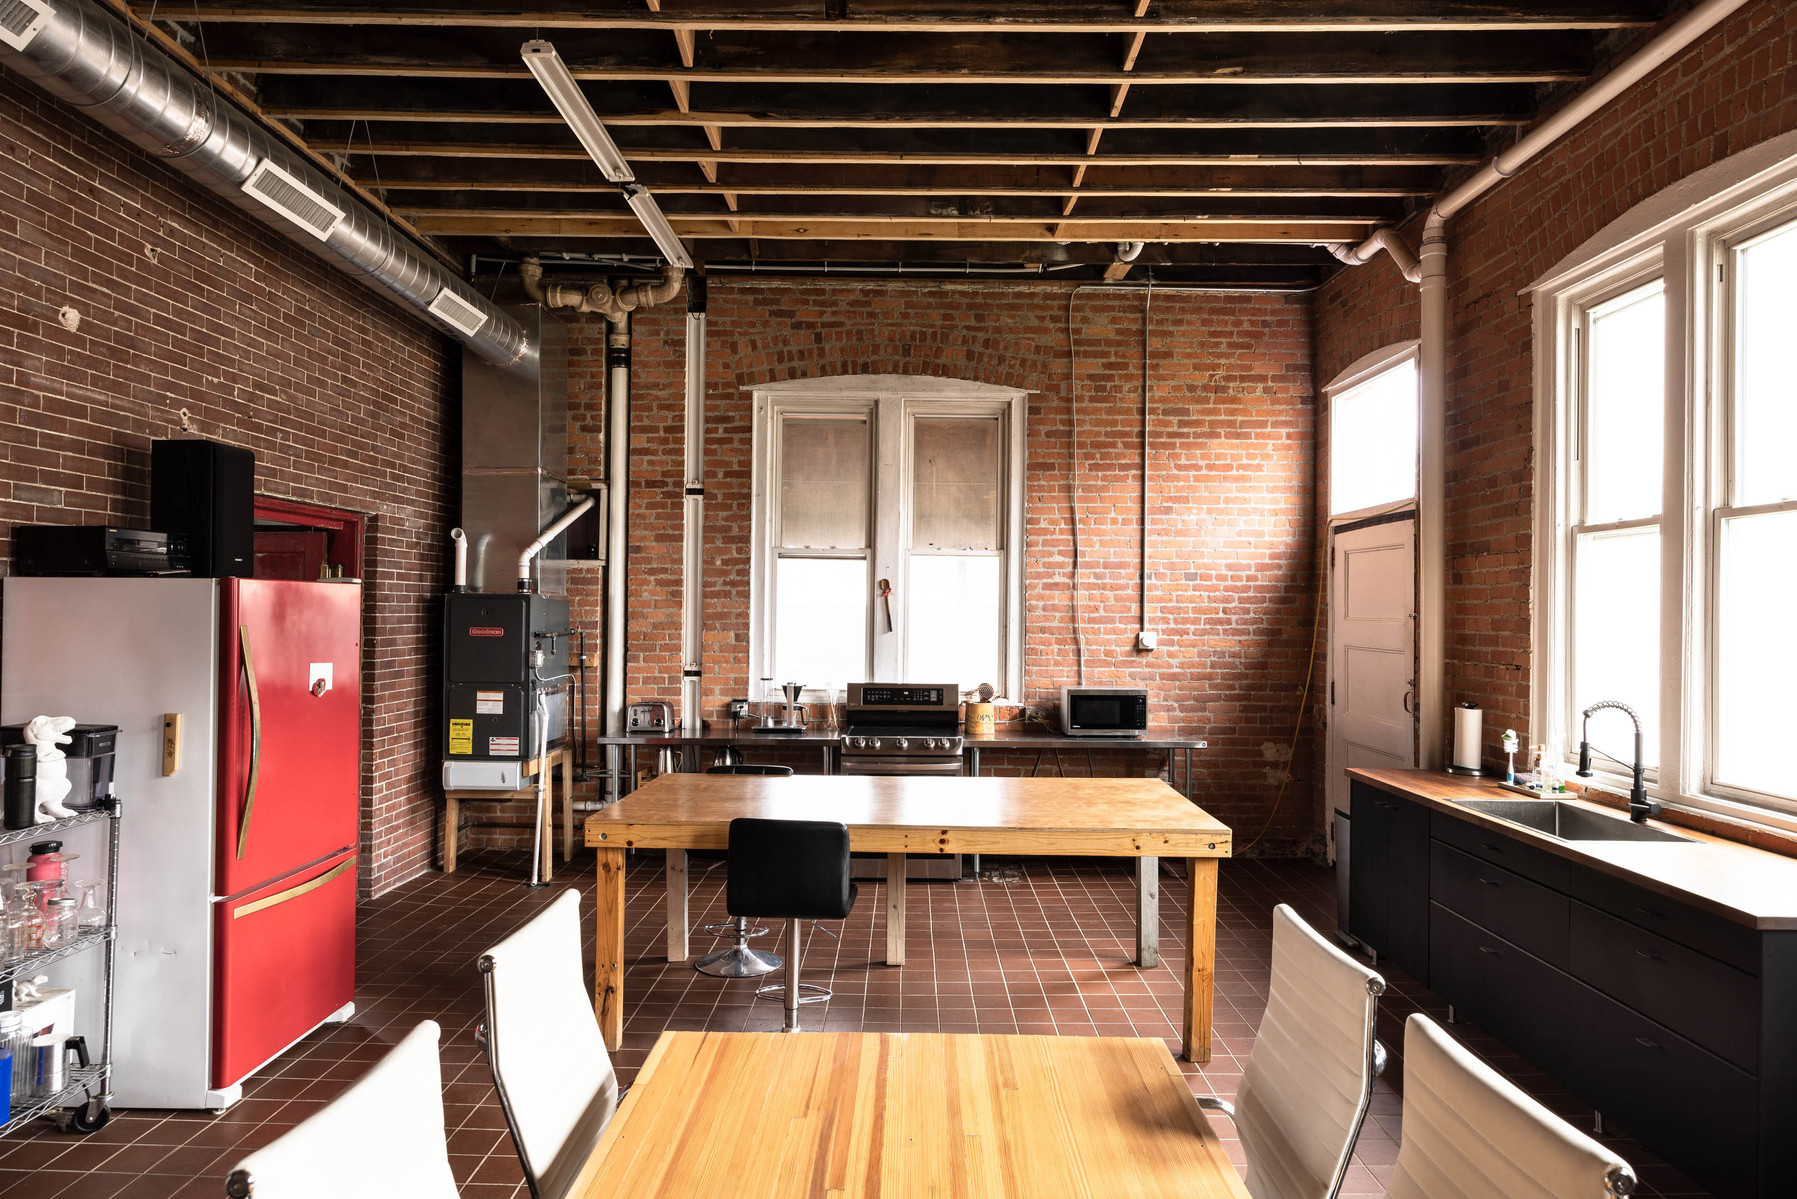 Detroit photo studio for daily rental. Kitchen available in lounge. Functioning stove and microwave and toaster. Sink and prep space, dining space, meeting space.